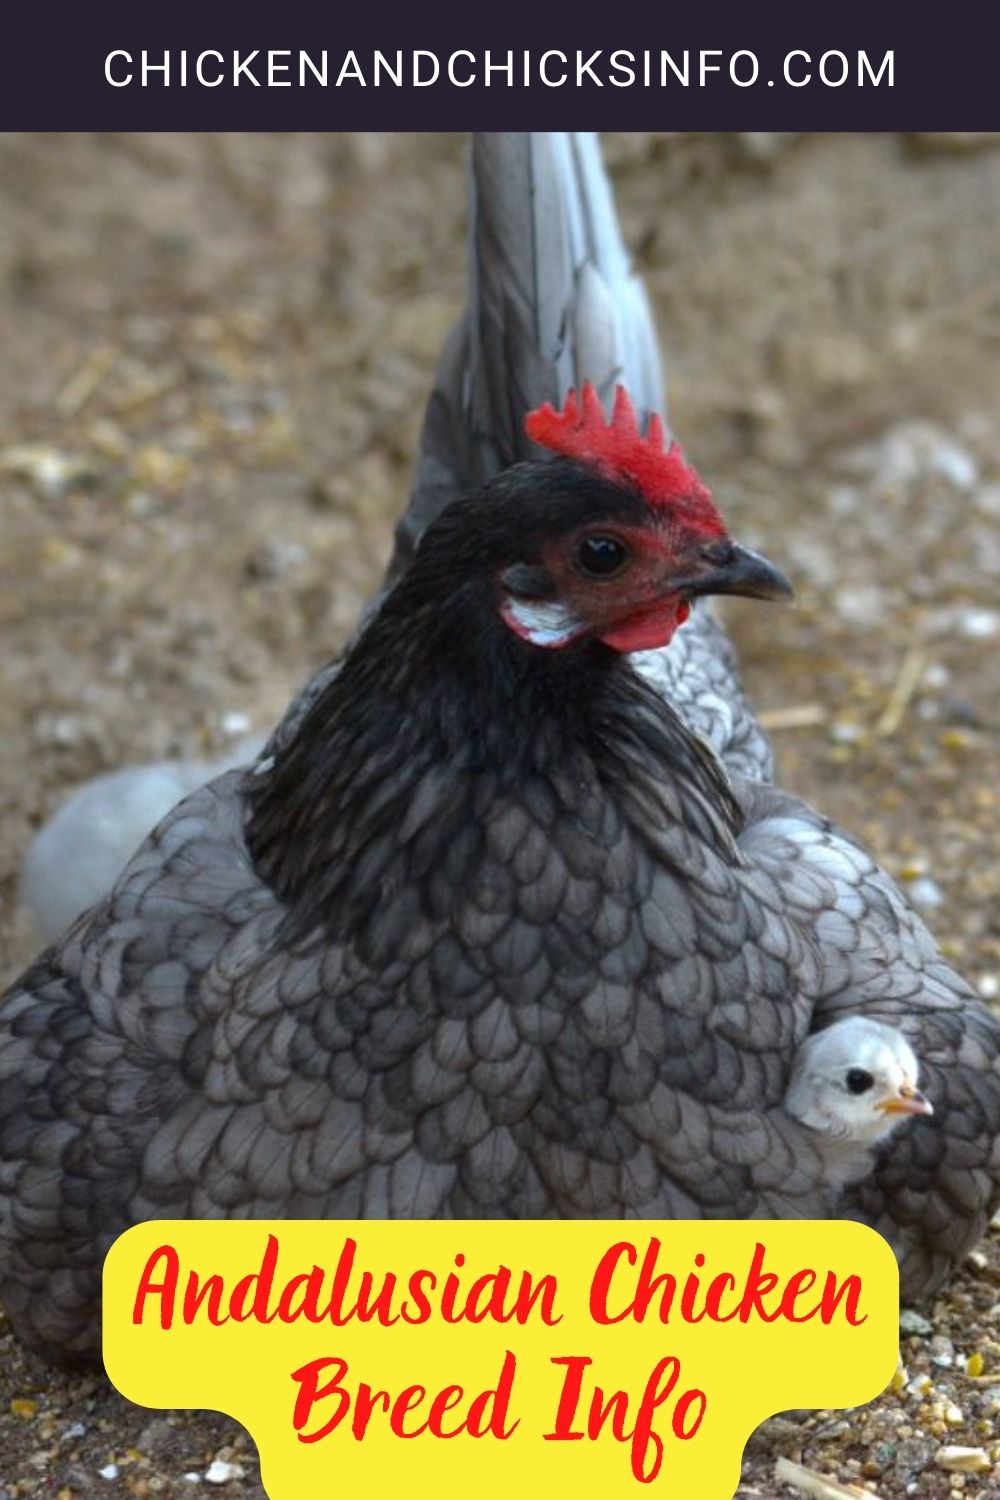 Andalusian Chicken Breed Info pinterest image.